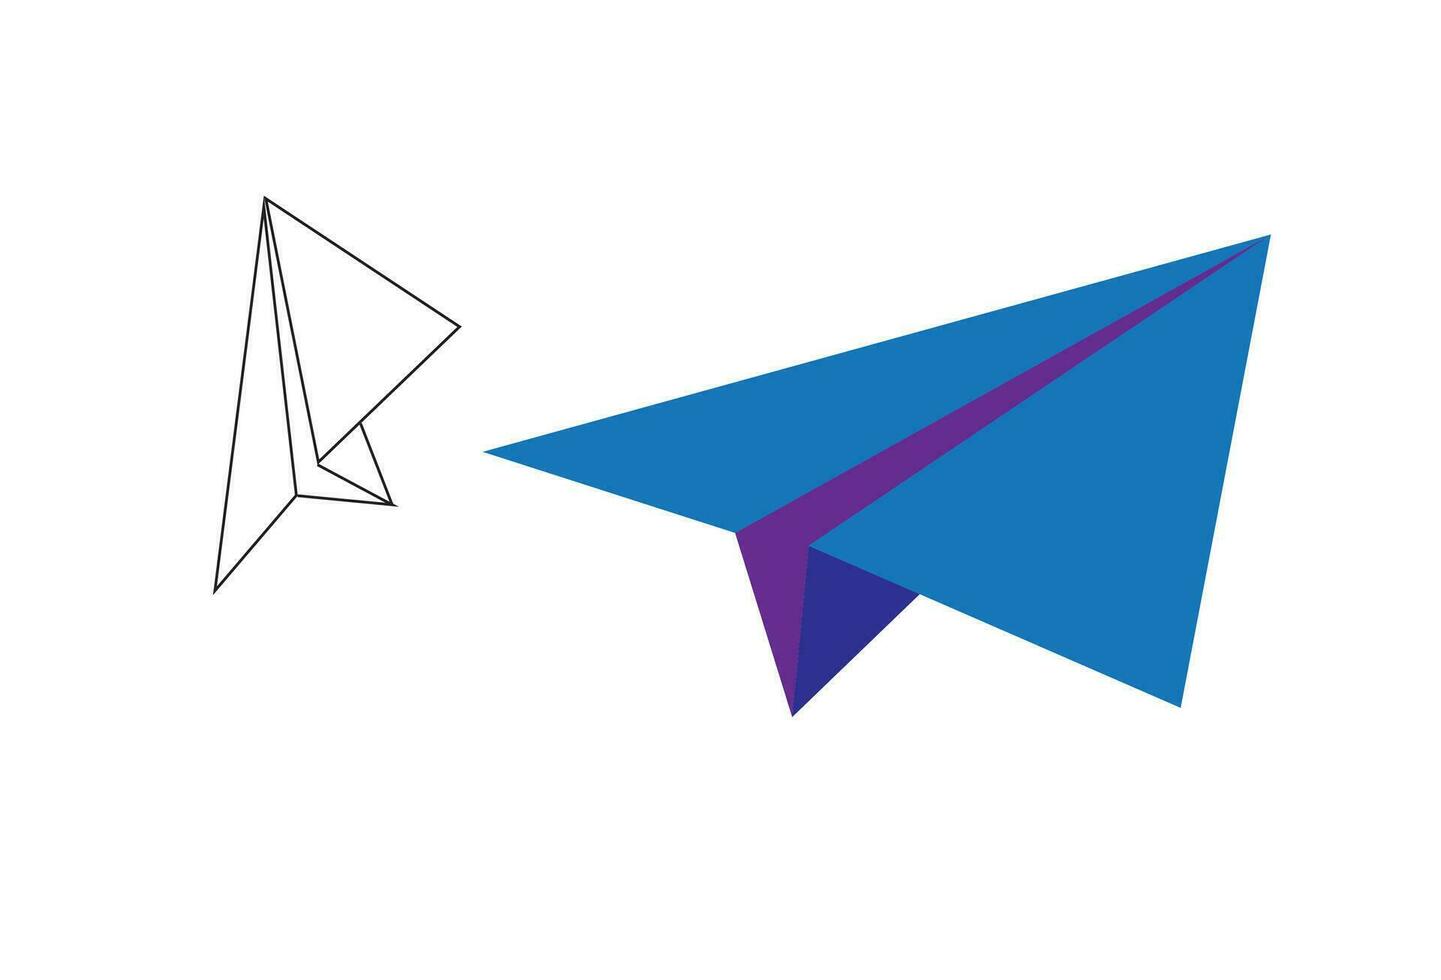 paper airplane, This vector set portrays a collection of hand-drawn doodle paper airplanes, showcased individually against a clean white background